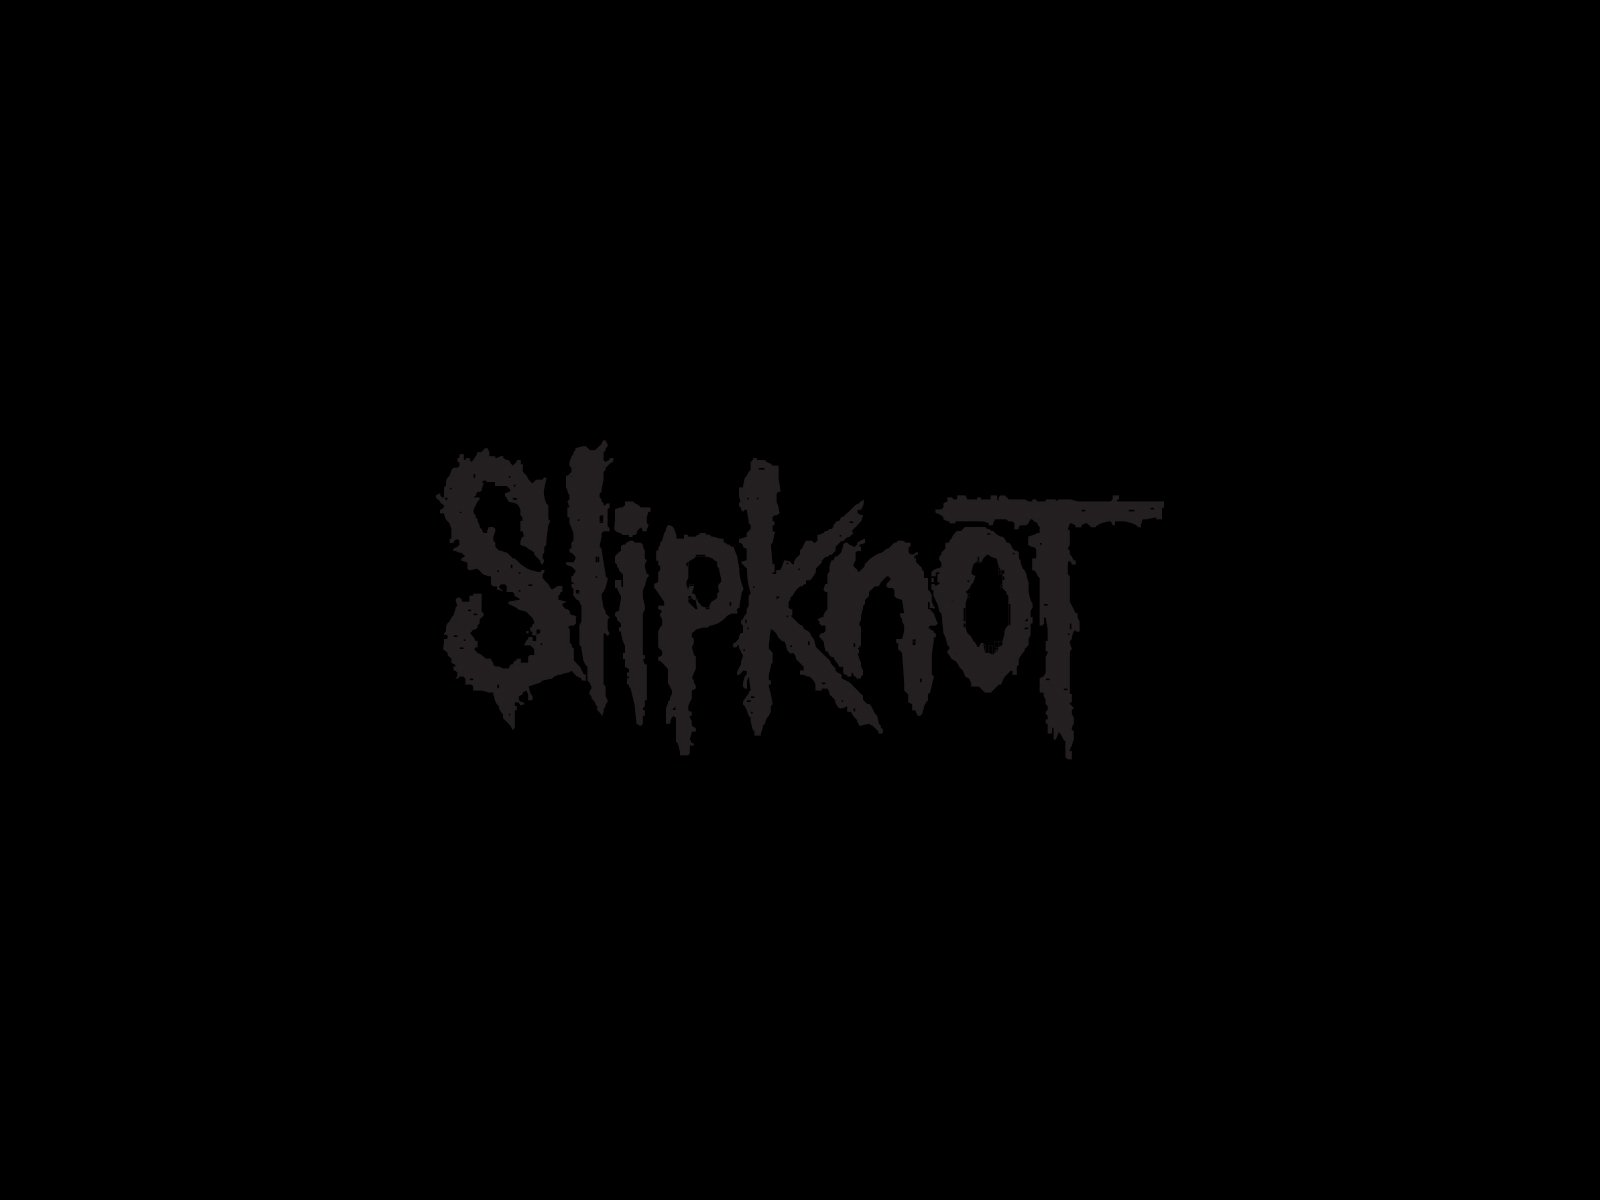 69 Slipknot Hd Wallpapers Background Images Wallpaper Abyss